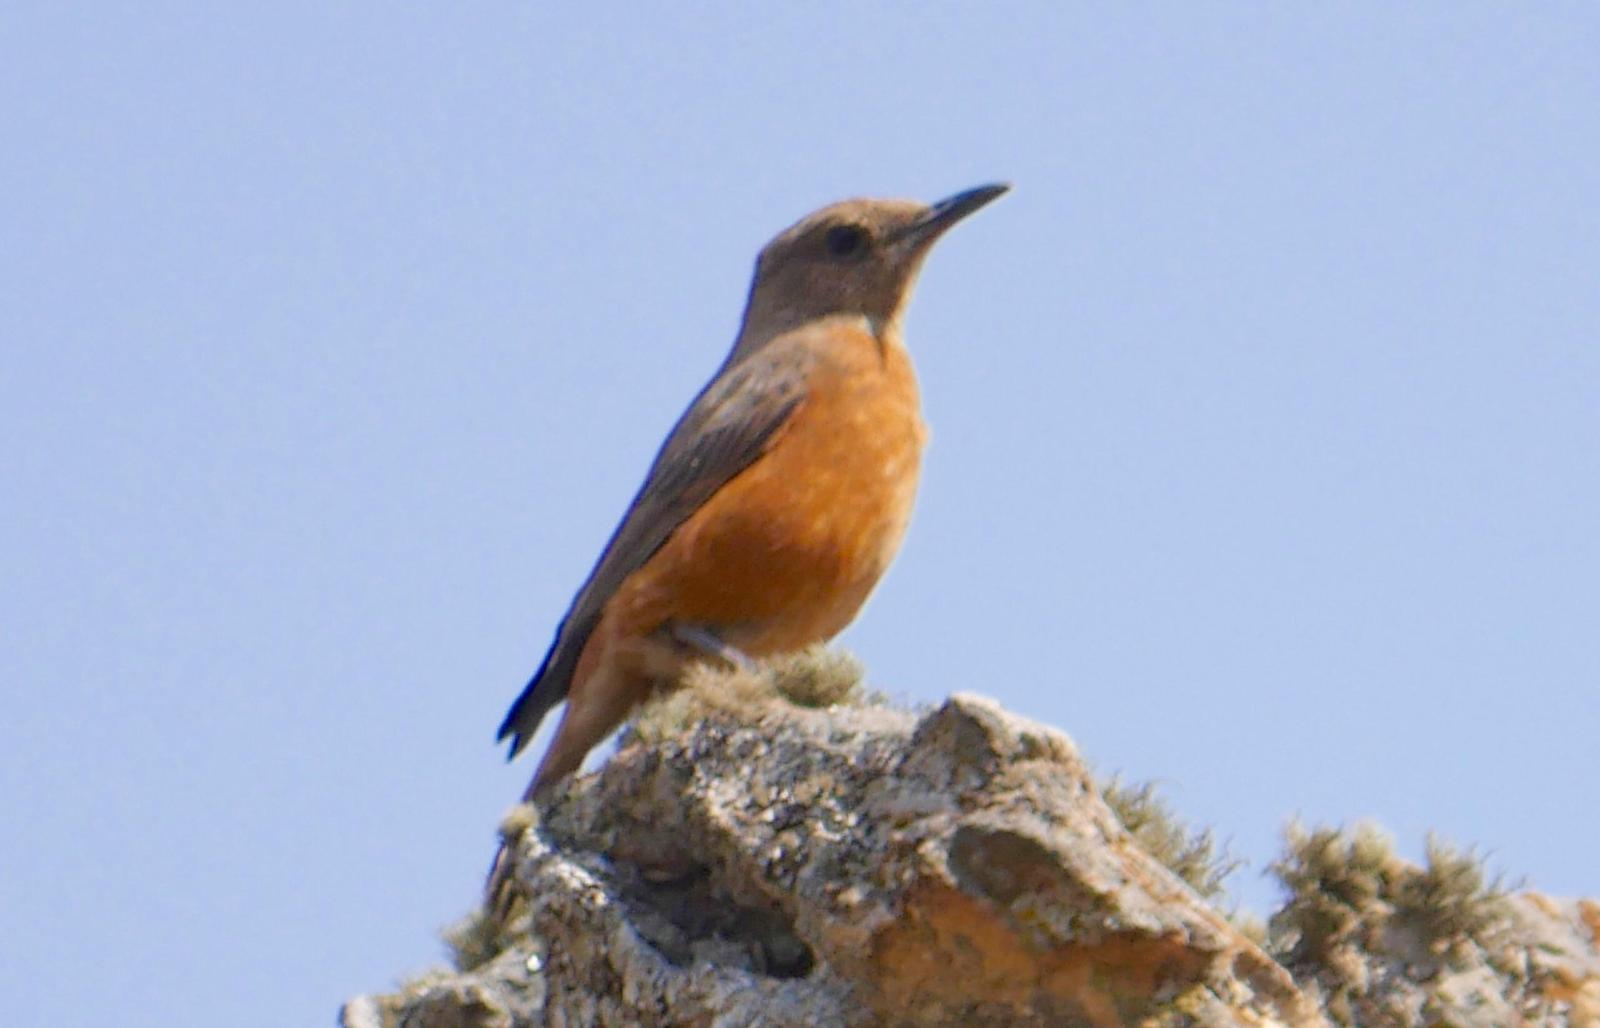 Cape Rock-Thrush Photo by Peter Lowe